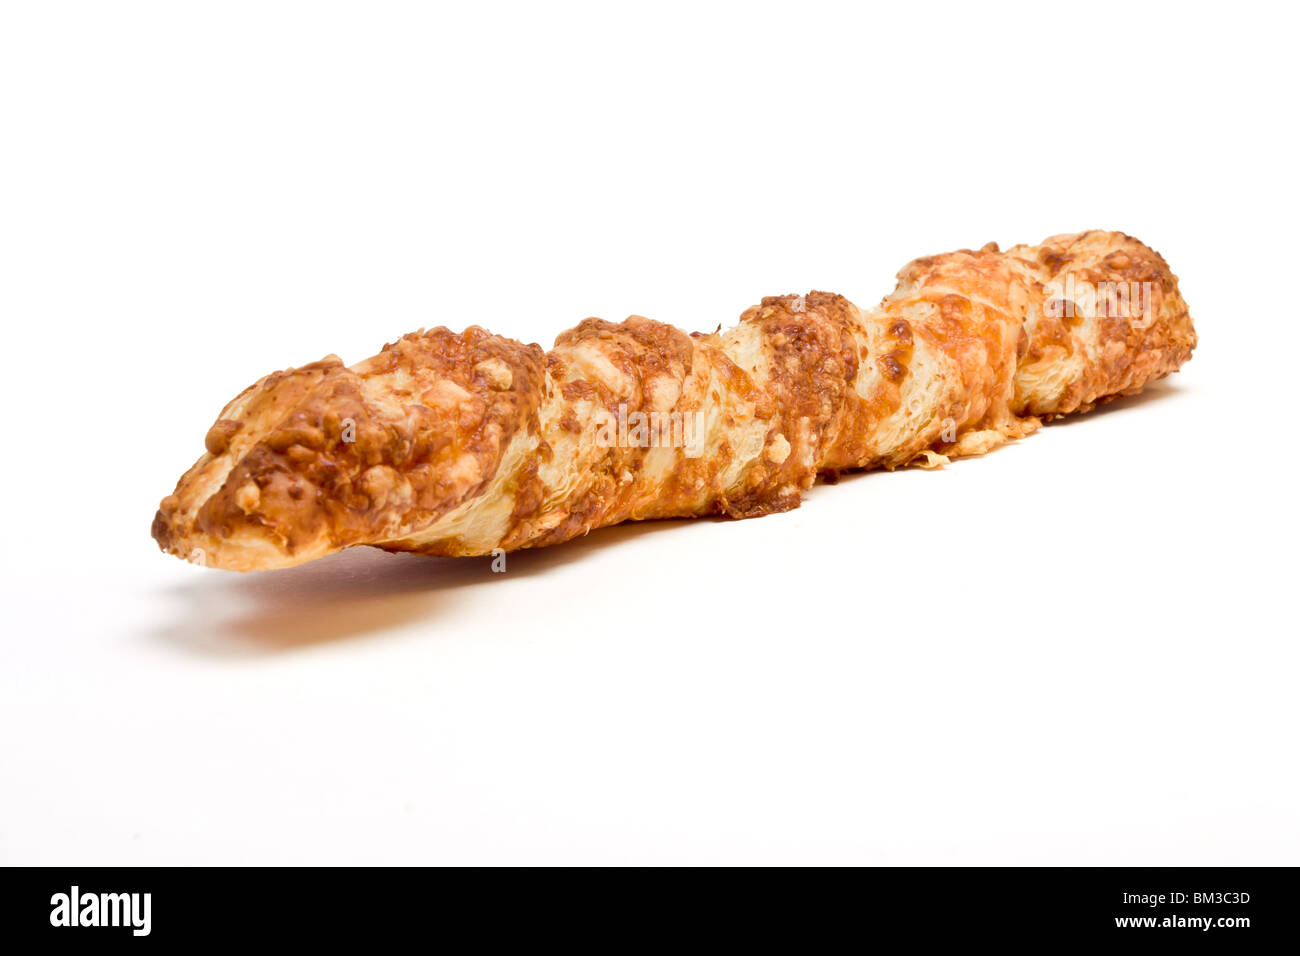 Cheese Twist Pastry from low perspective isolated against white background Stock Photo